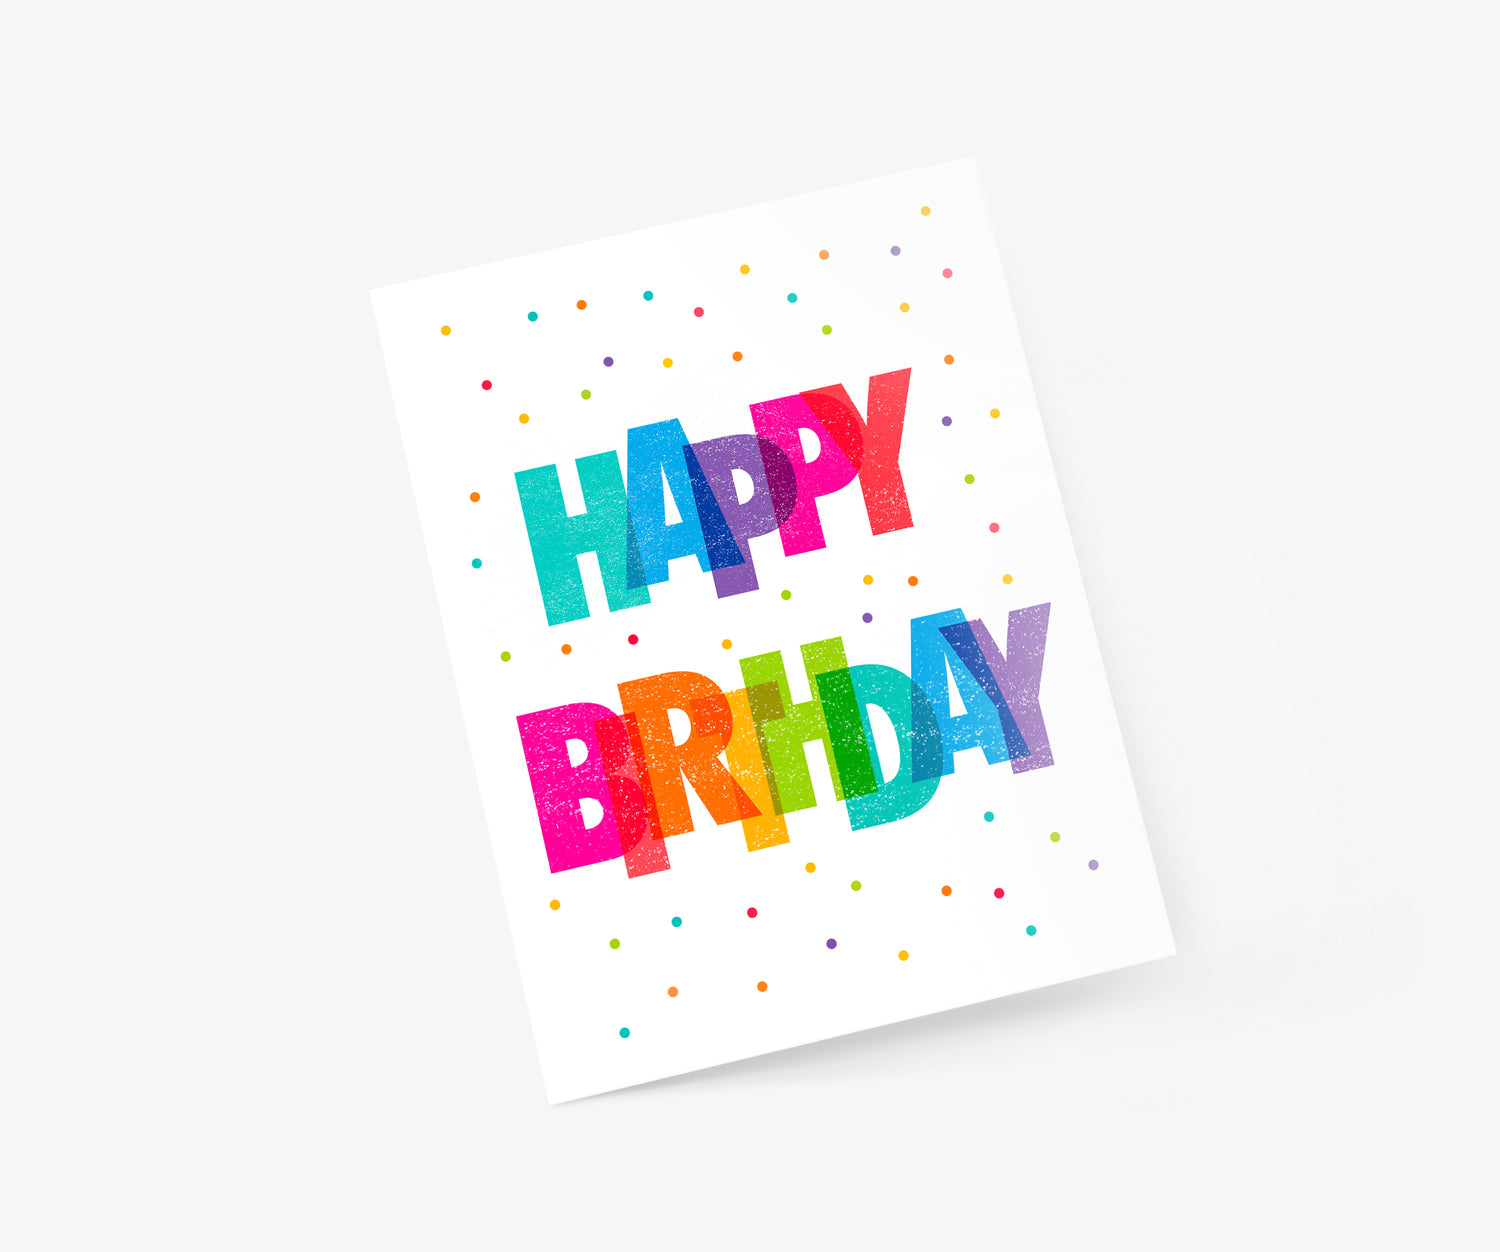 Happy Birthday Colorful Birthday Card | Footnotes Paper